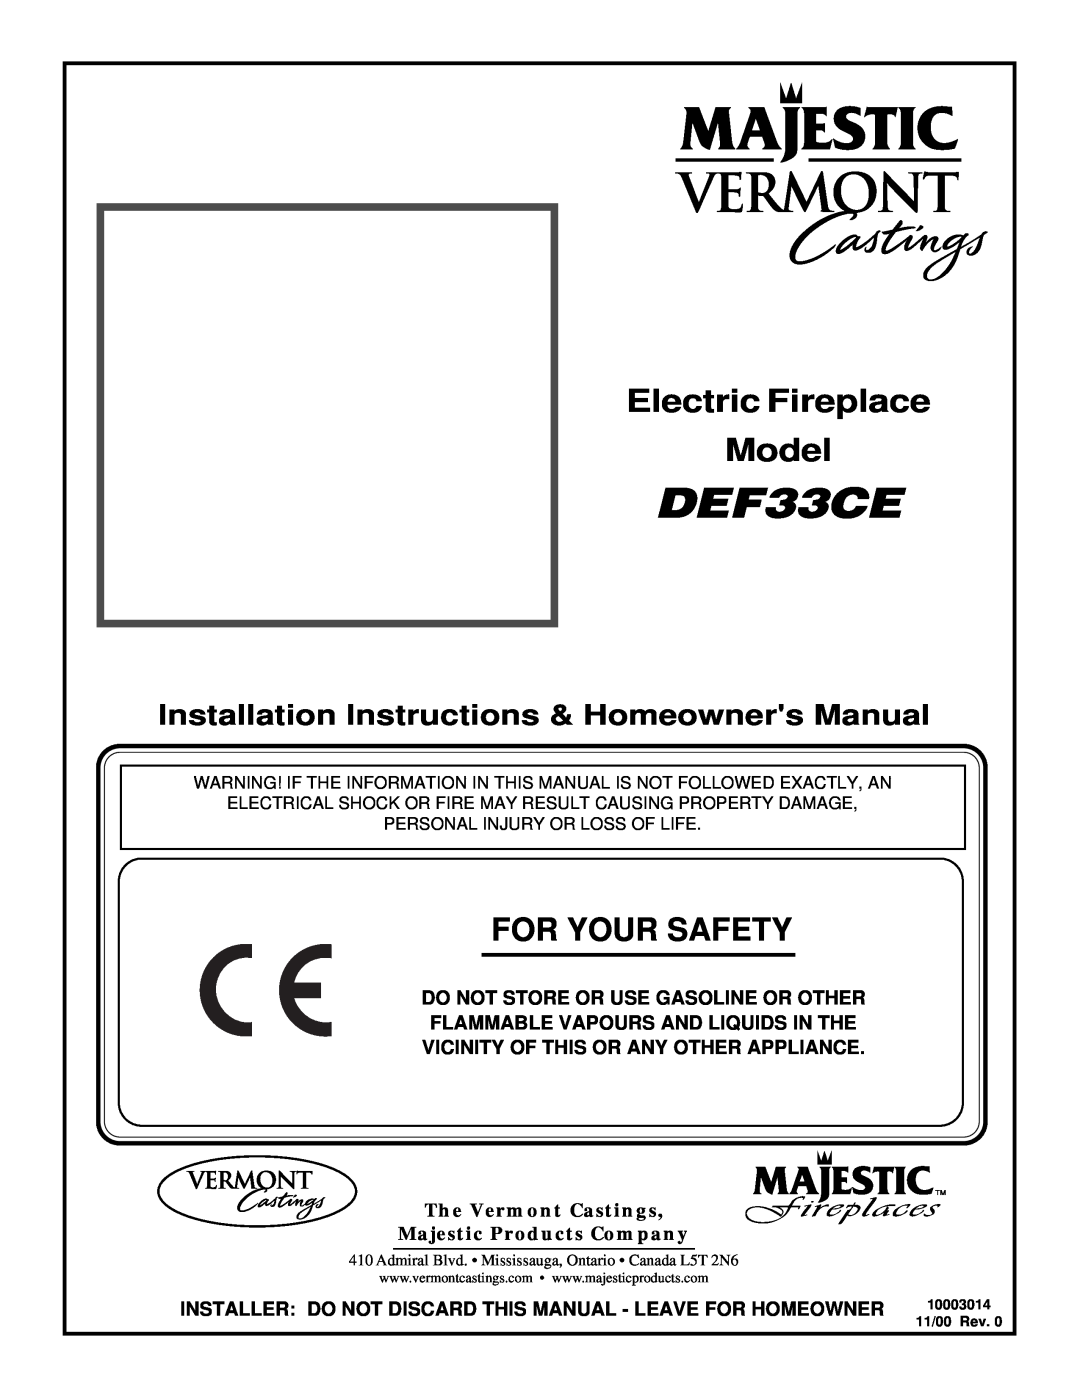 Vermont Casting DEF33CE installation instructions Electric Fireplace Model, For Your Safety 